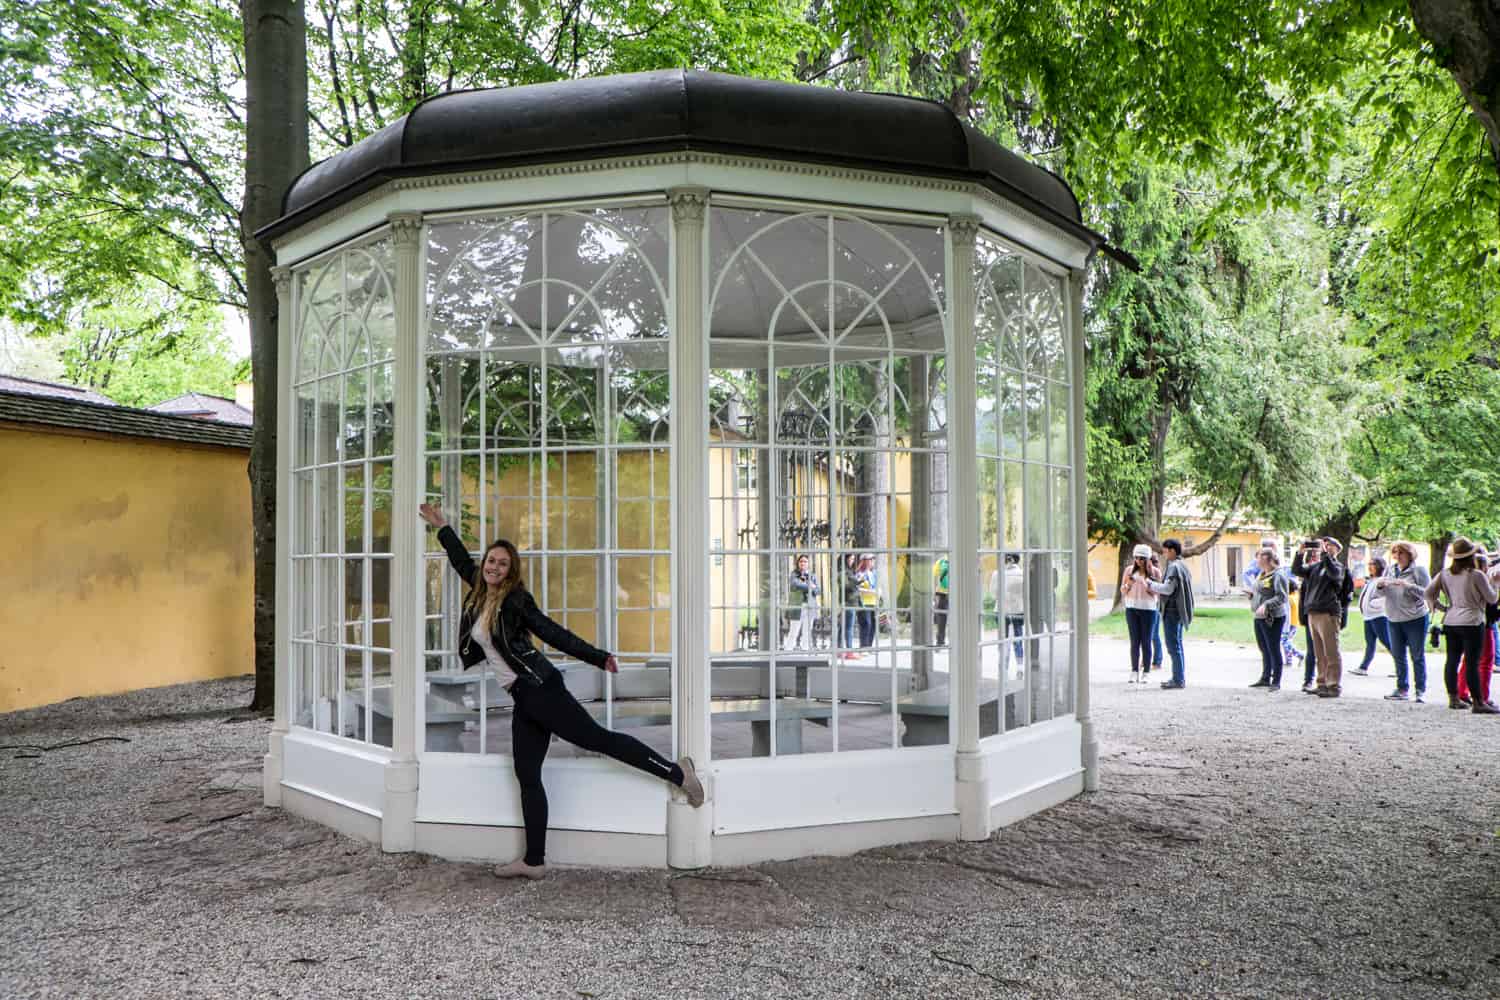 A woman dressed in black poses in a dance style outside a white and glass gazebo in Salzburg made famous in the Sound of Music. 